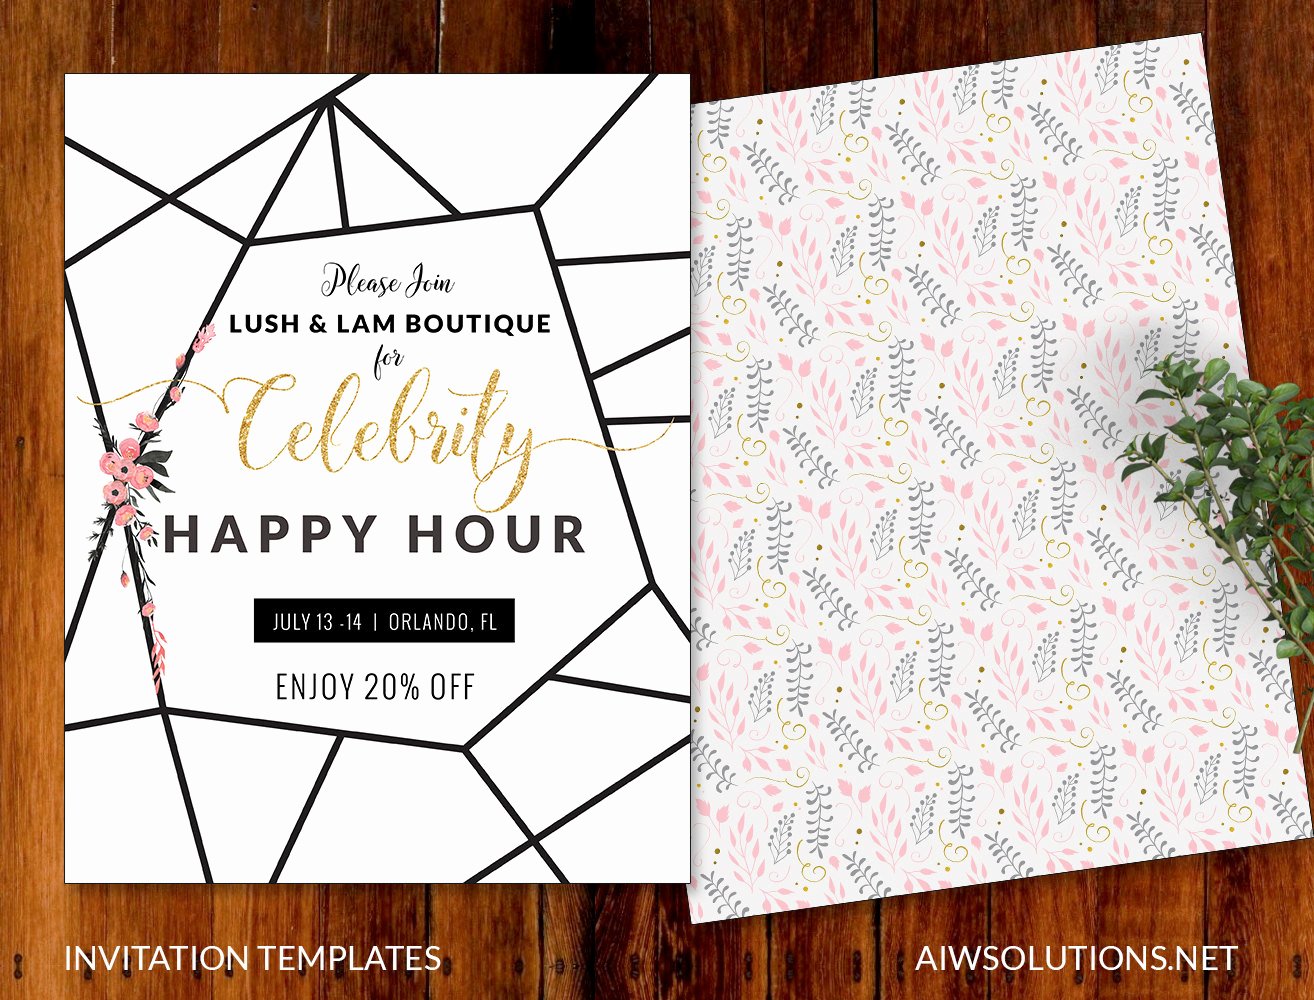 Happy Hour Invitation Template Luxury Invitations event Template Save the Date Template Flyer